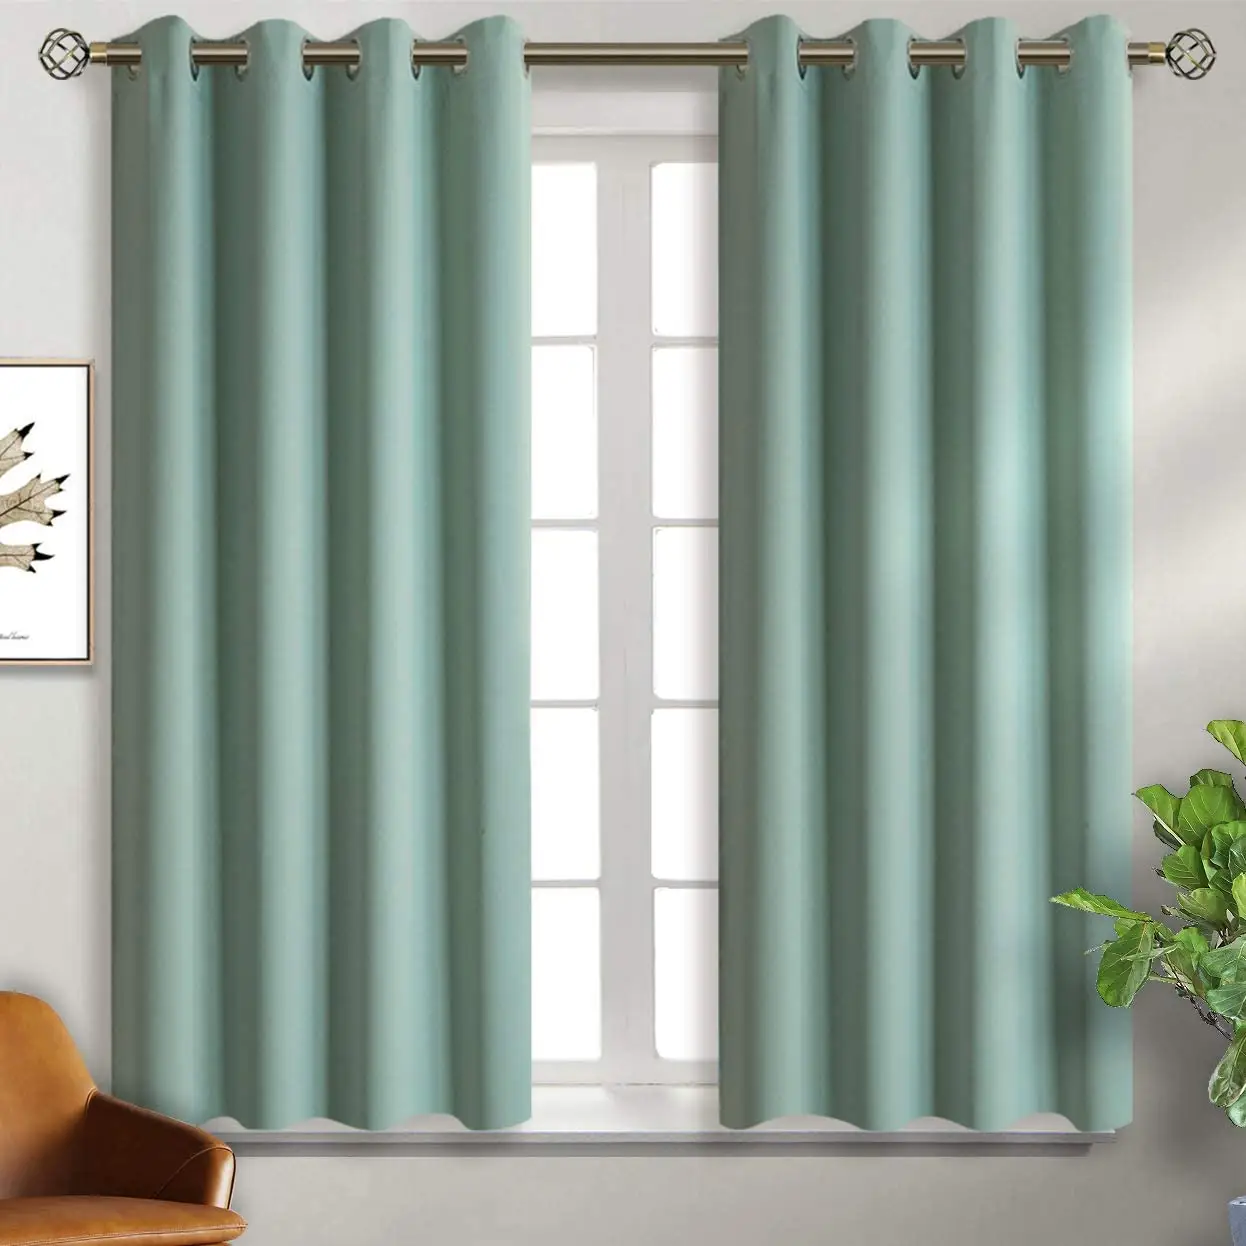 Blackout Curtain Panels Window Draperies 52x84 Inch 2 Pieces Insulating Room Darkening Blackout Drapes